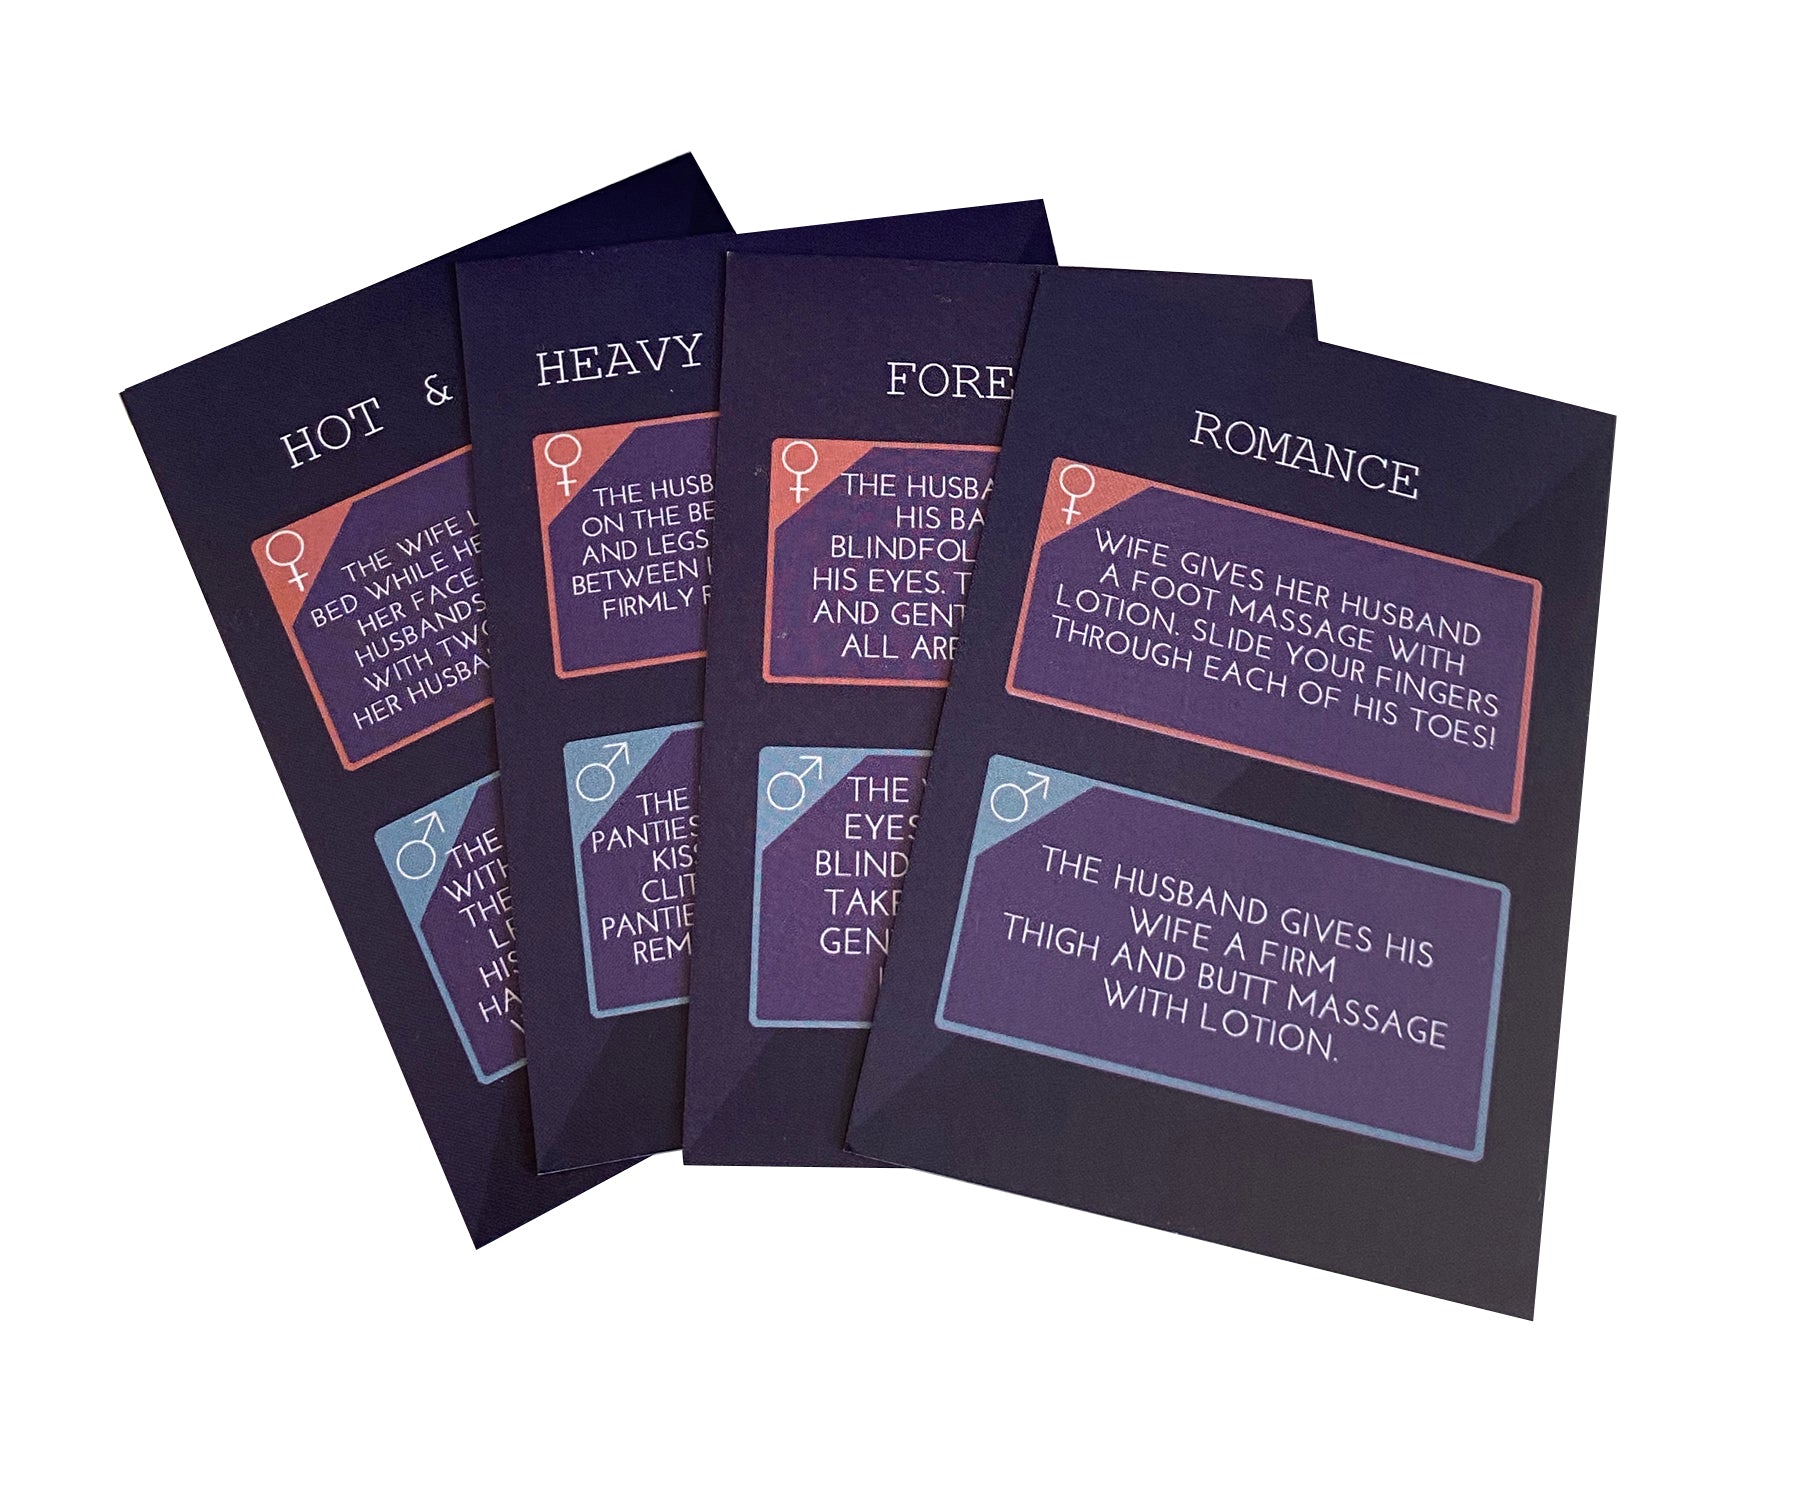 Ultimate Intimacy Bedroom Game Card Deck: Romance, Foreplay, Heavy Foreplay, Hot and Heavy